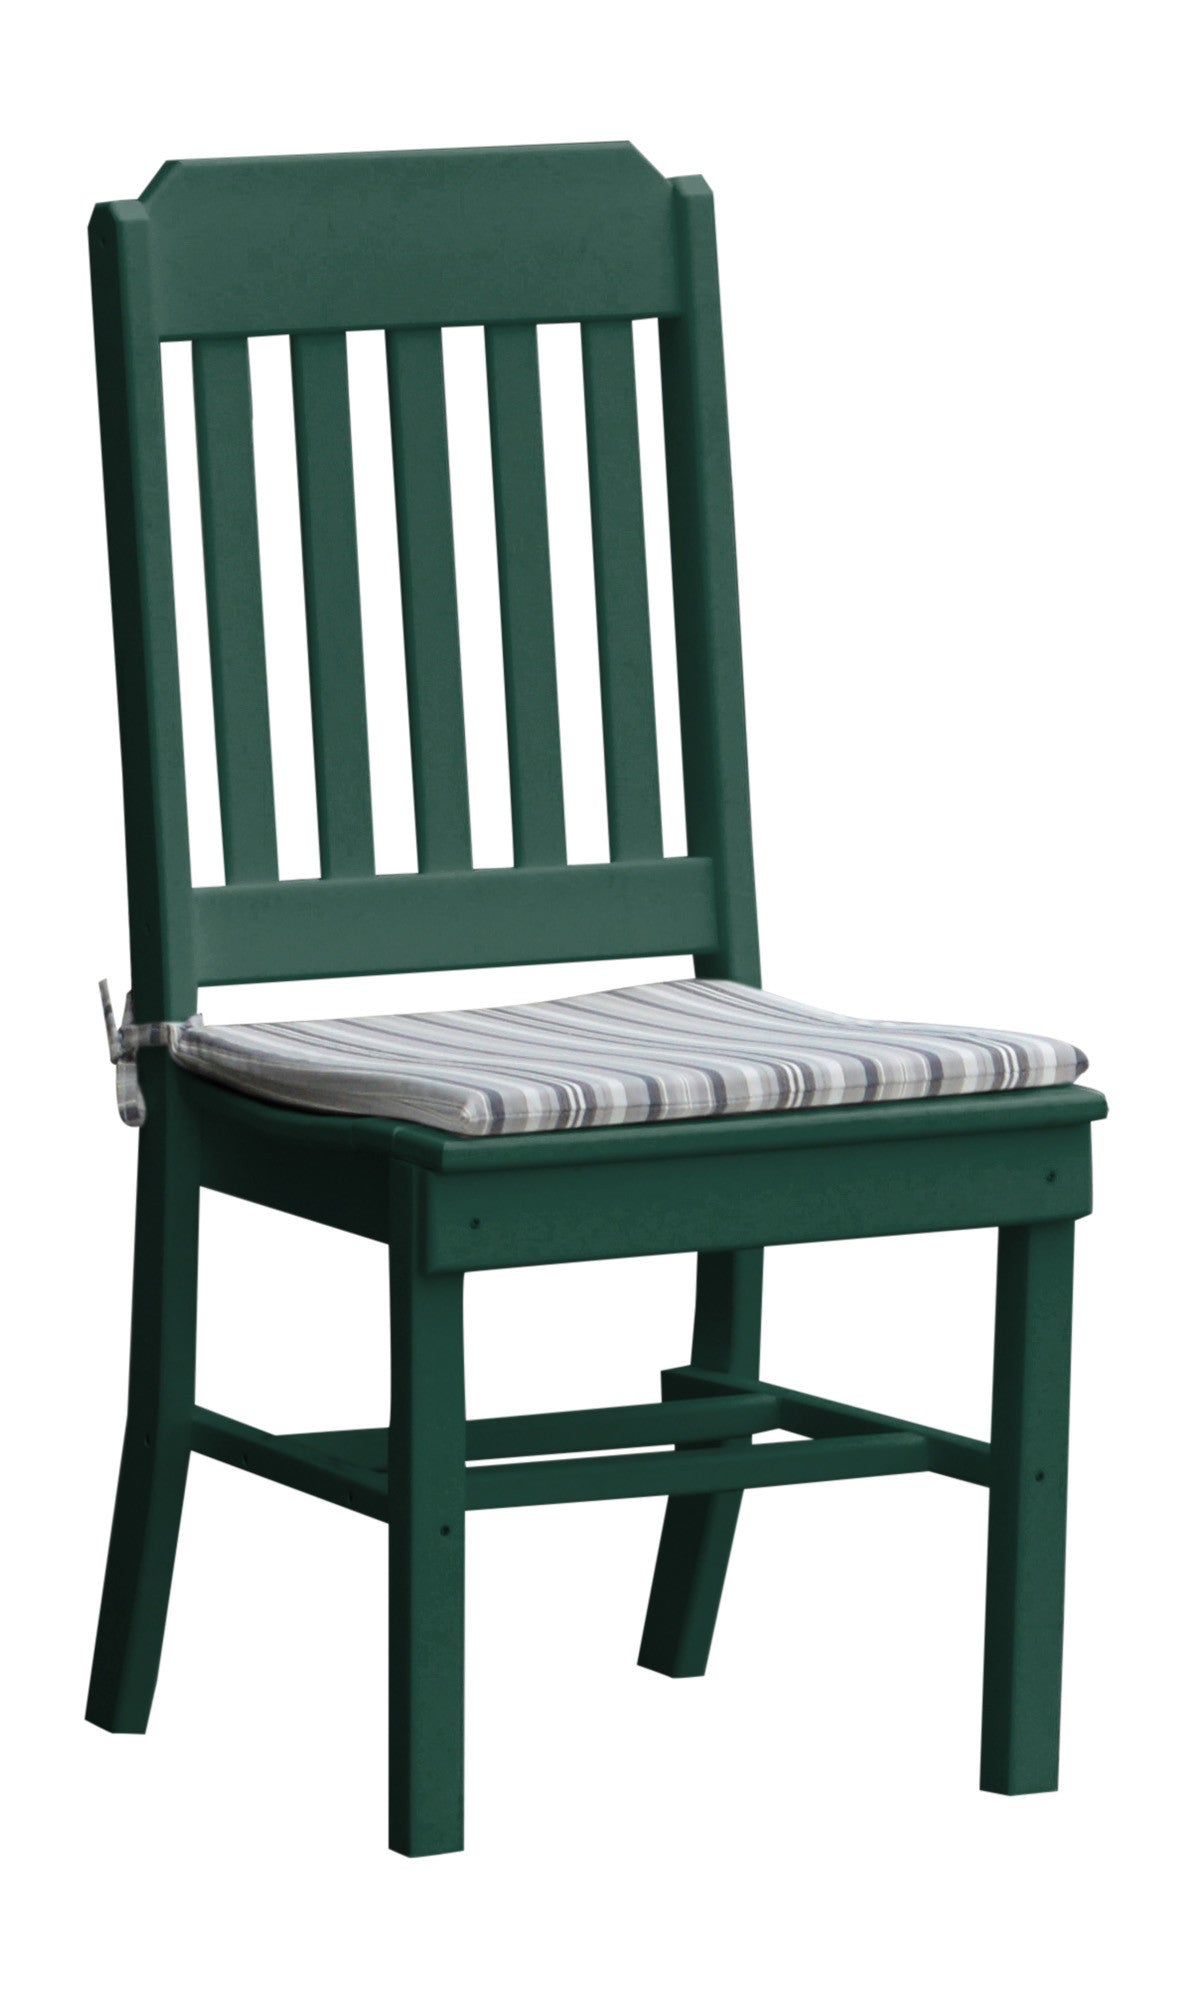 A&L Furniture Company Recycled Plastic Traditional Dining Chair- Turf Green